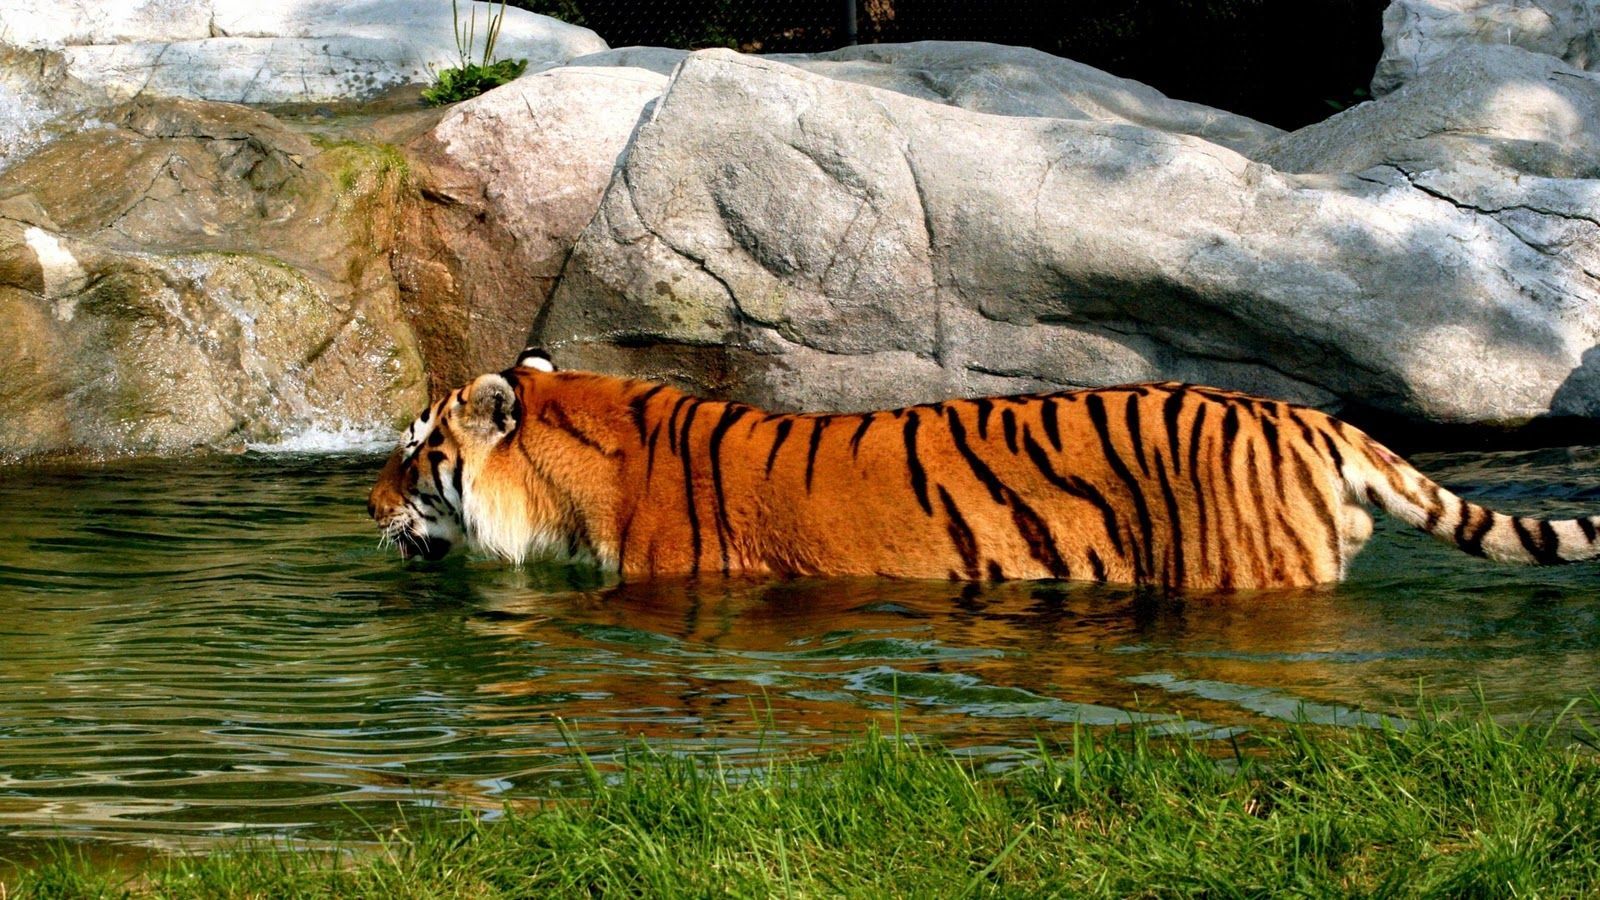 Tiger Hd Wallpaper - HD Wallpapers Lovely